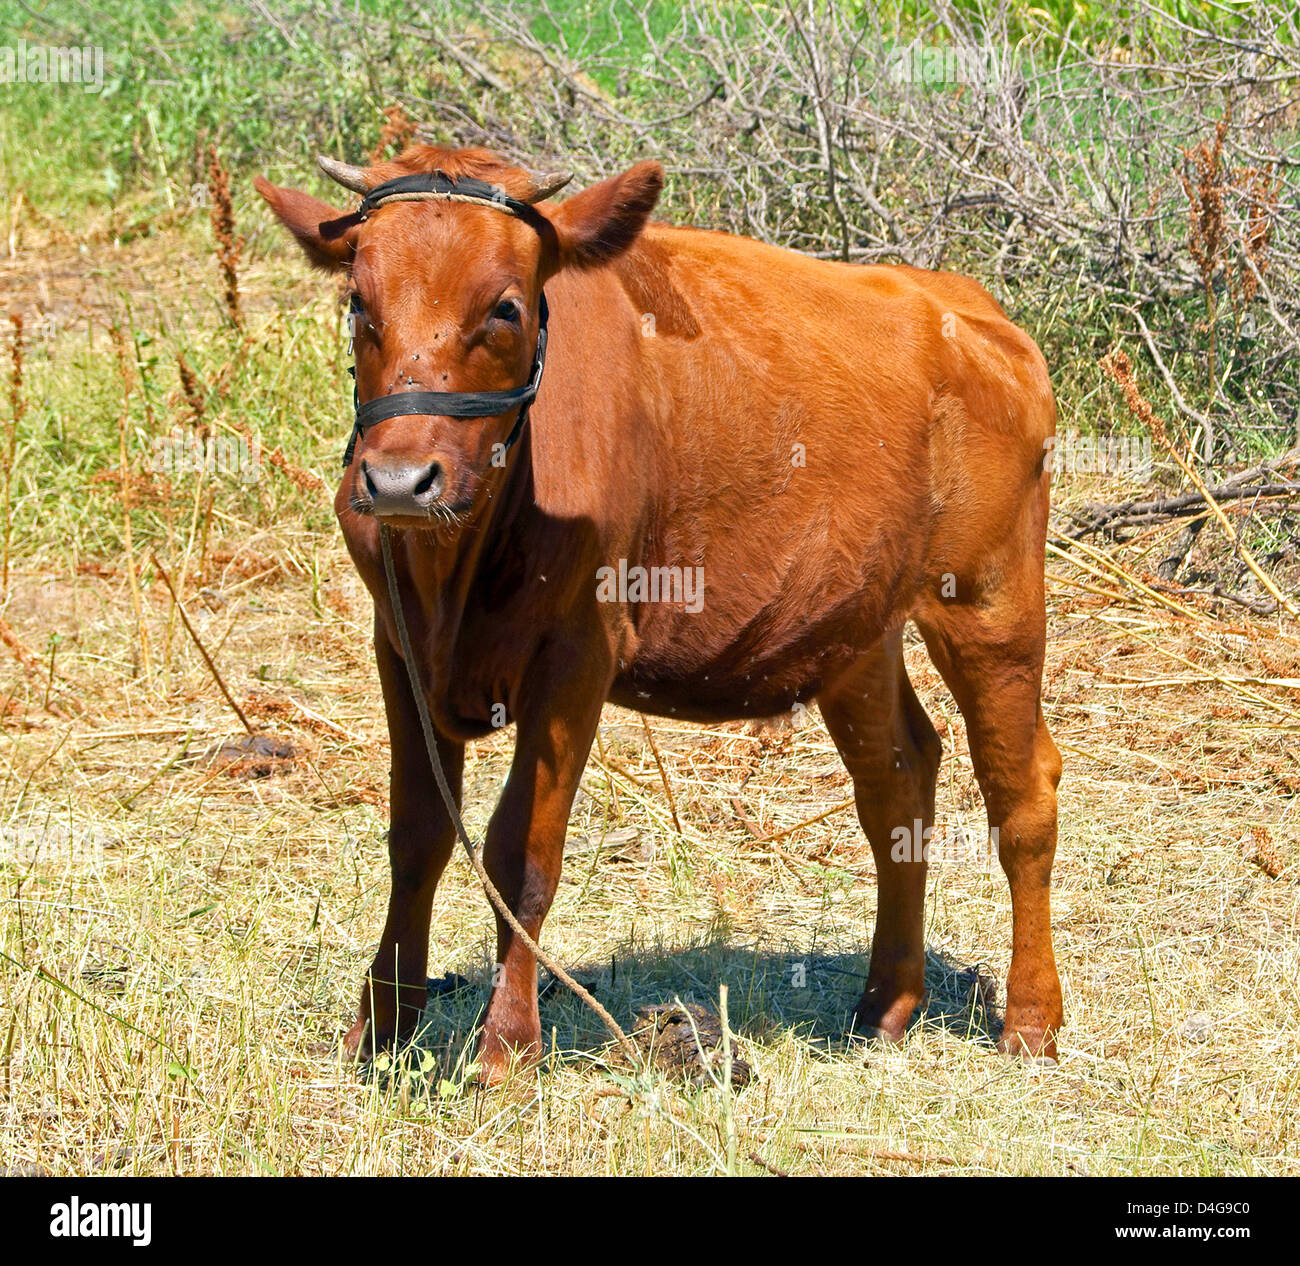 Red young calf feeding Stock Photo - Alamy